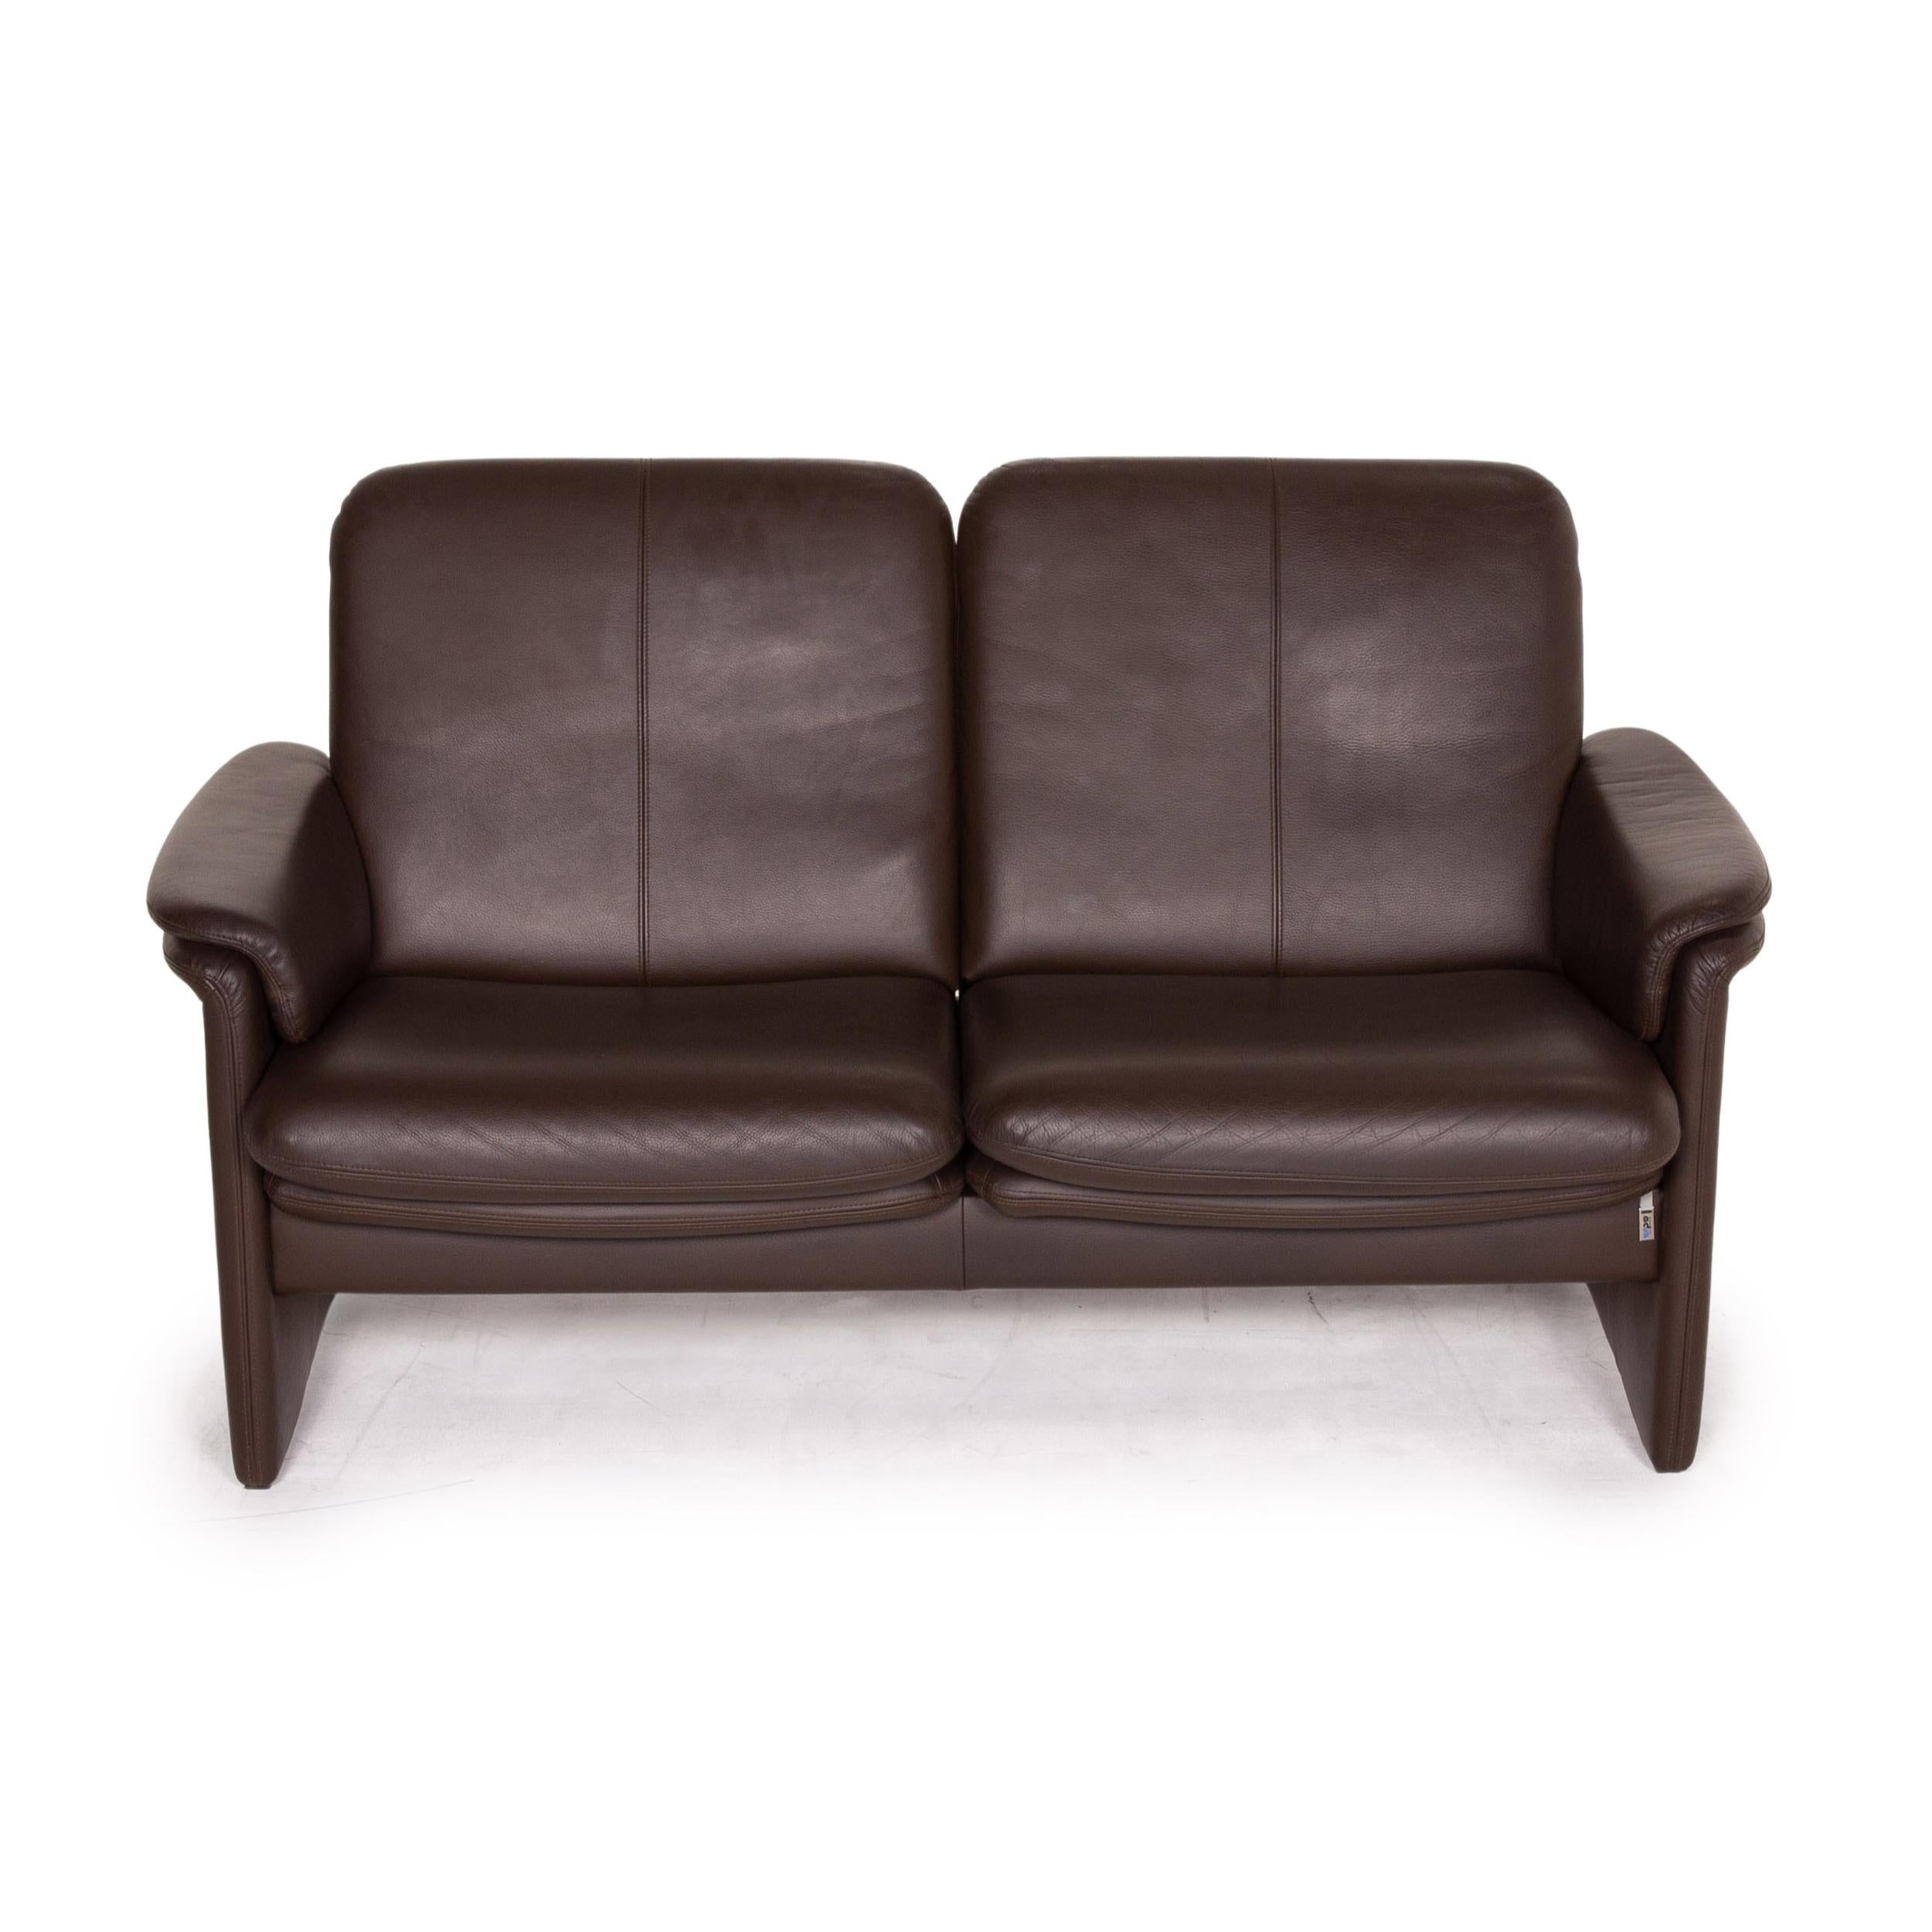 Erpo City Leather Sofa Brown Dark Brown Two-Seat Couch For Sale 4